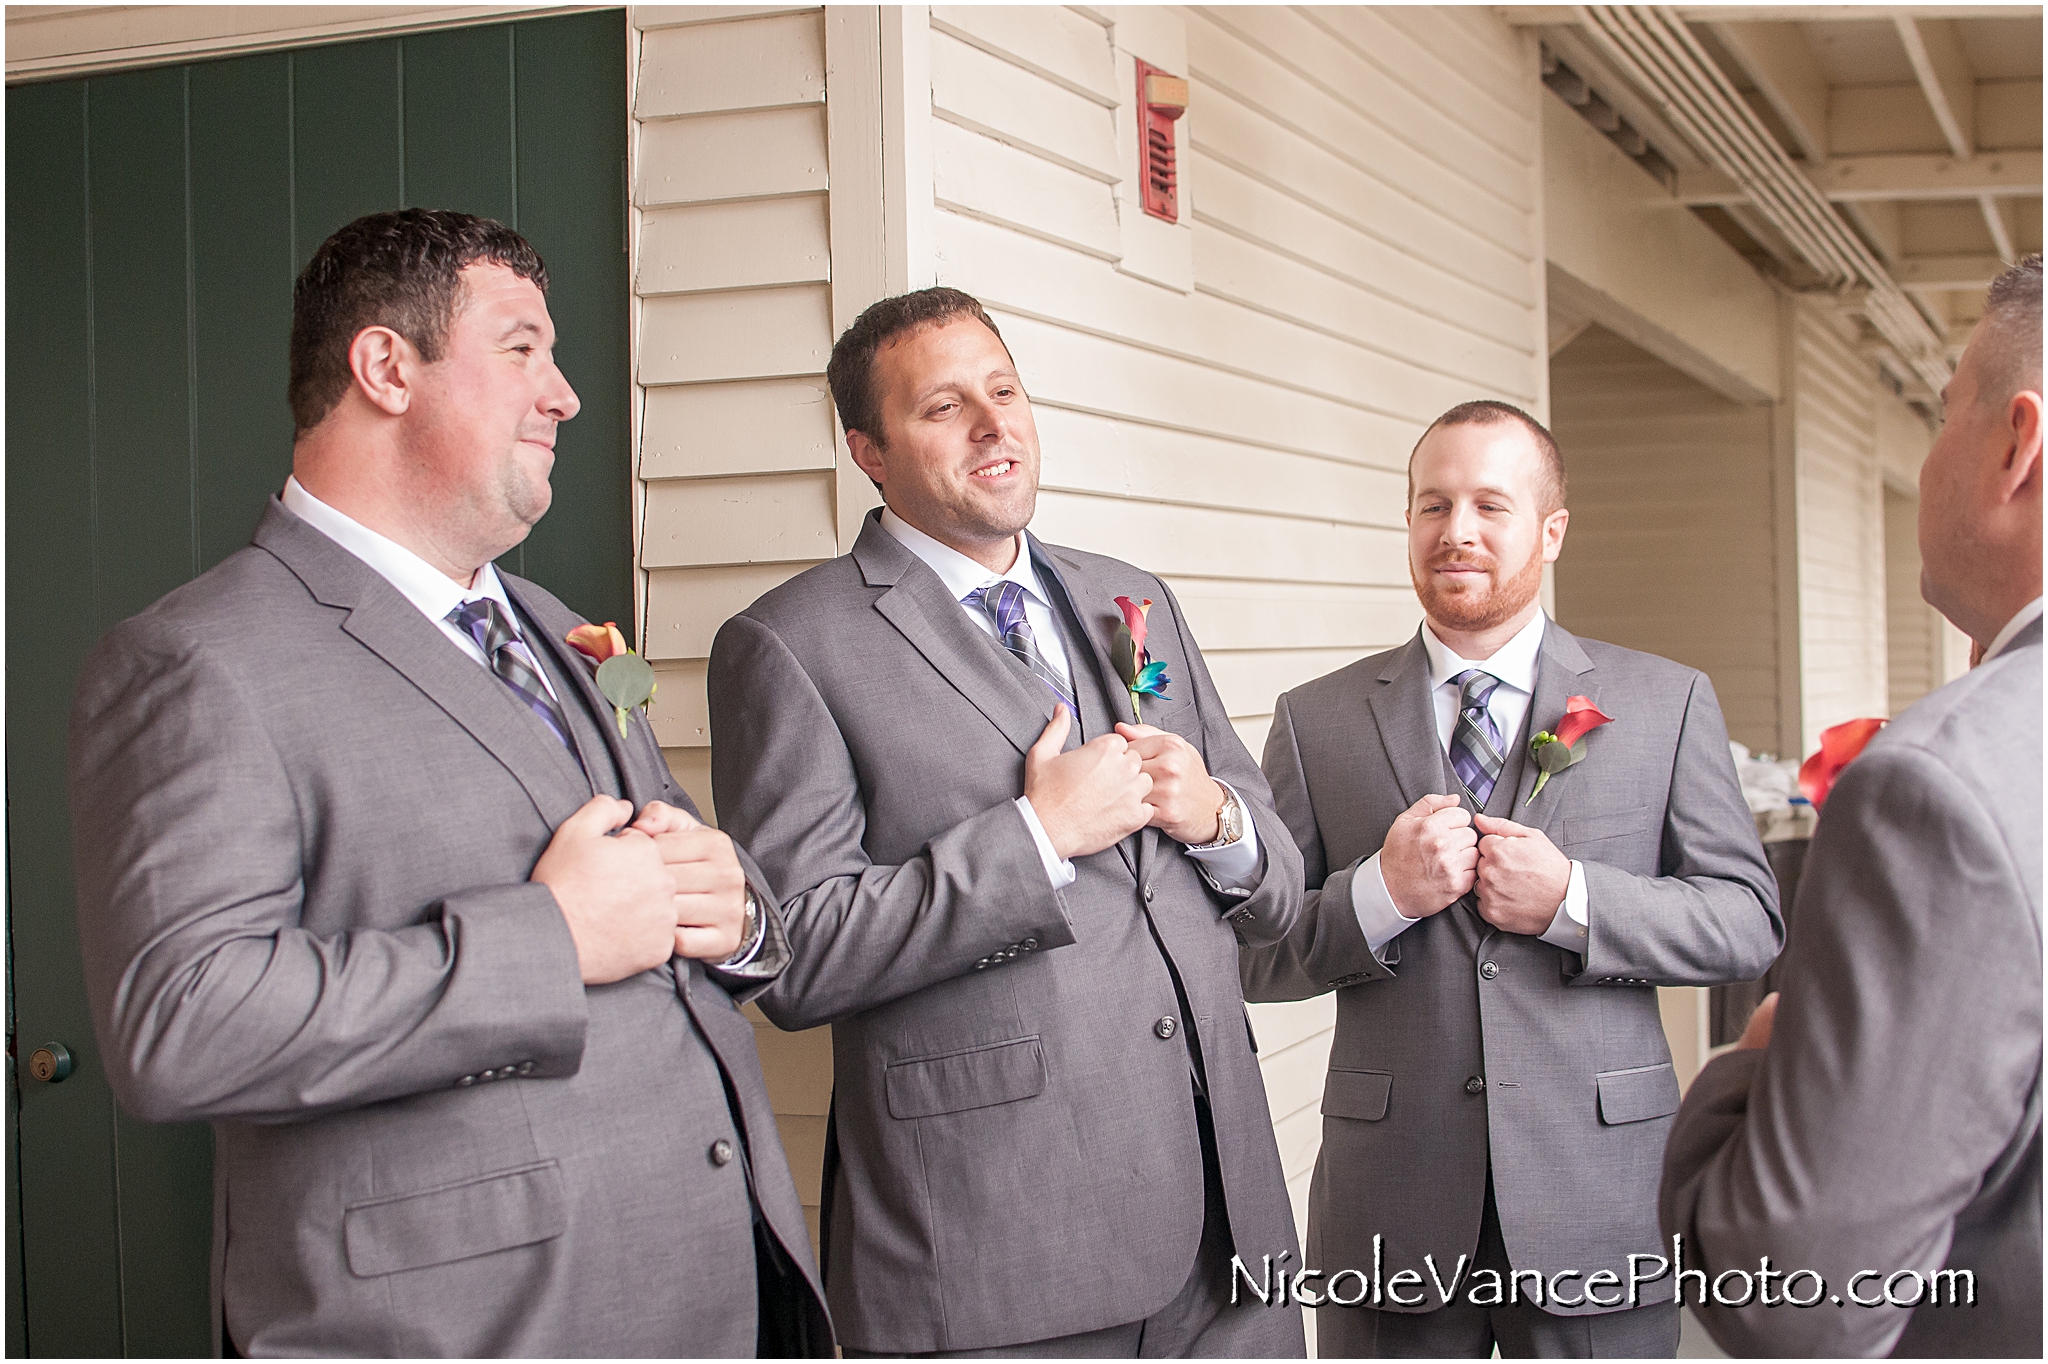 The groom enjoys a few minutes together with his groomsmen at the Linden Row Inn, in Richmond, VA.